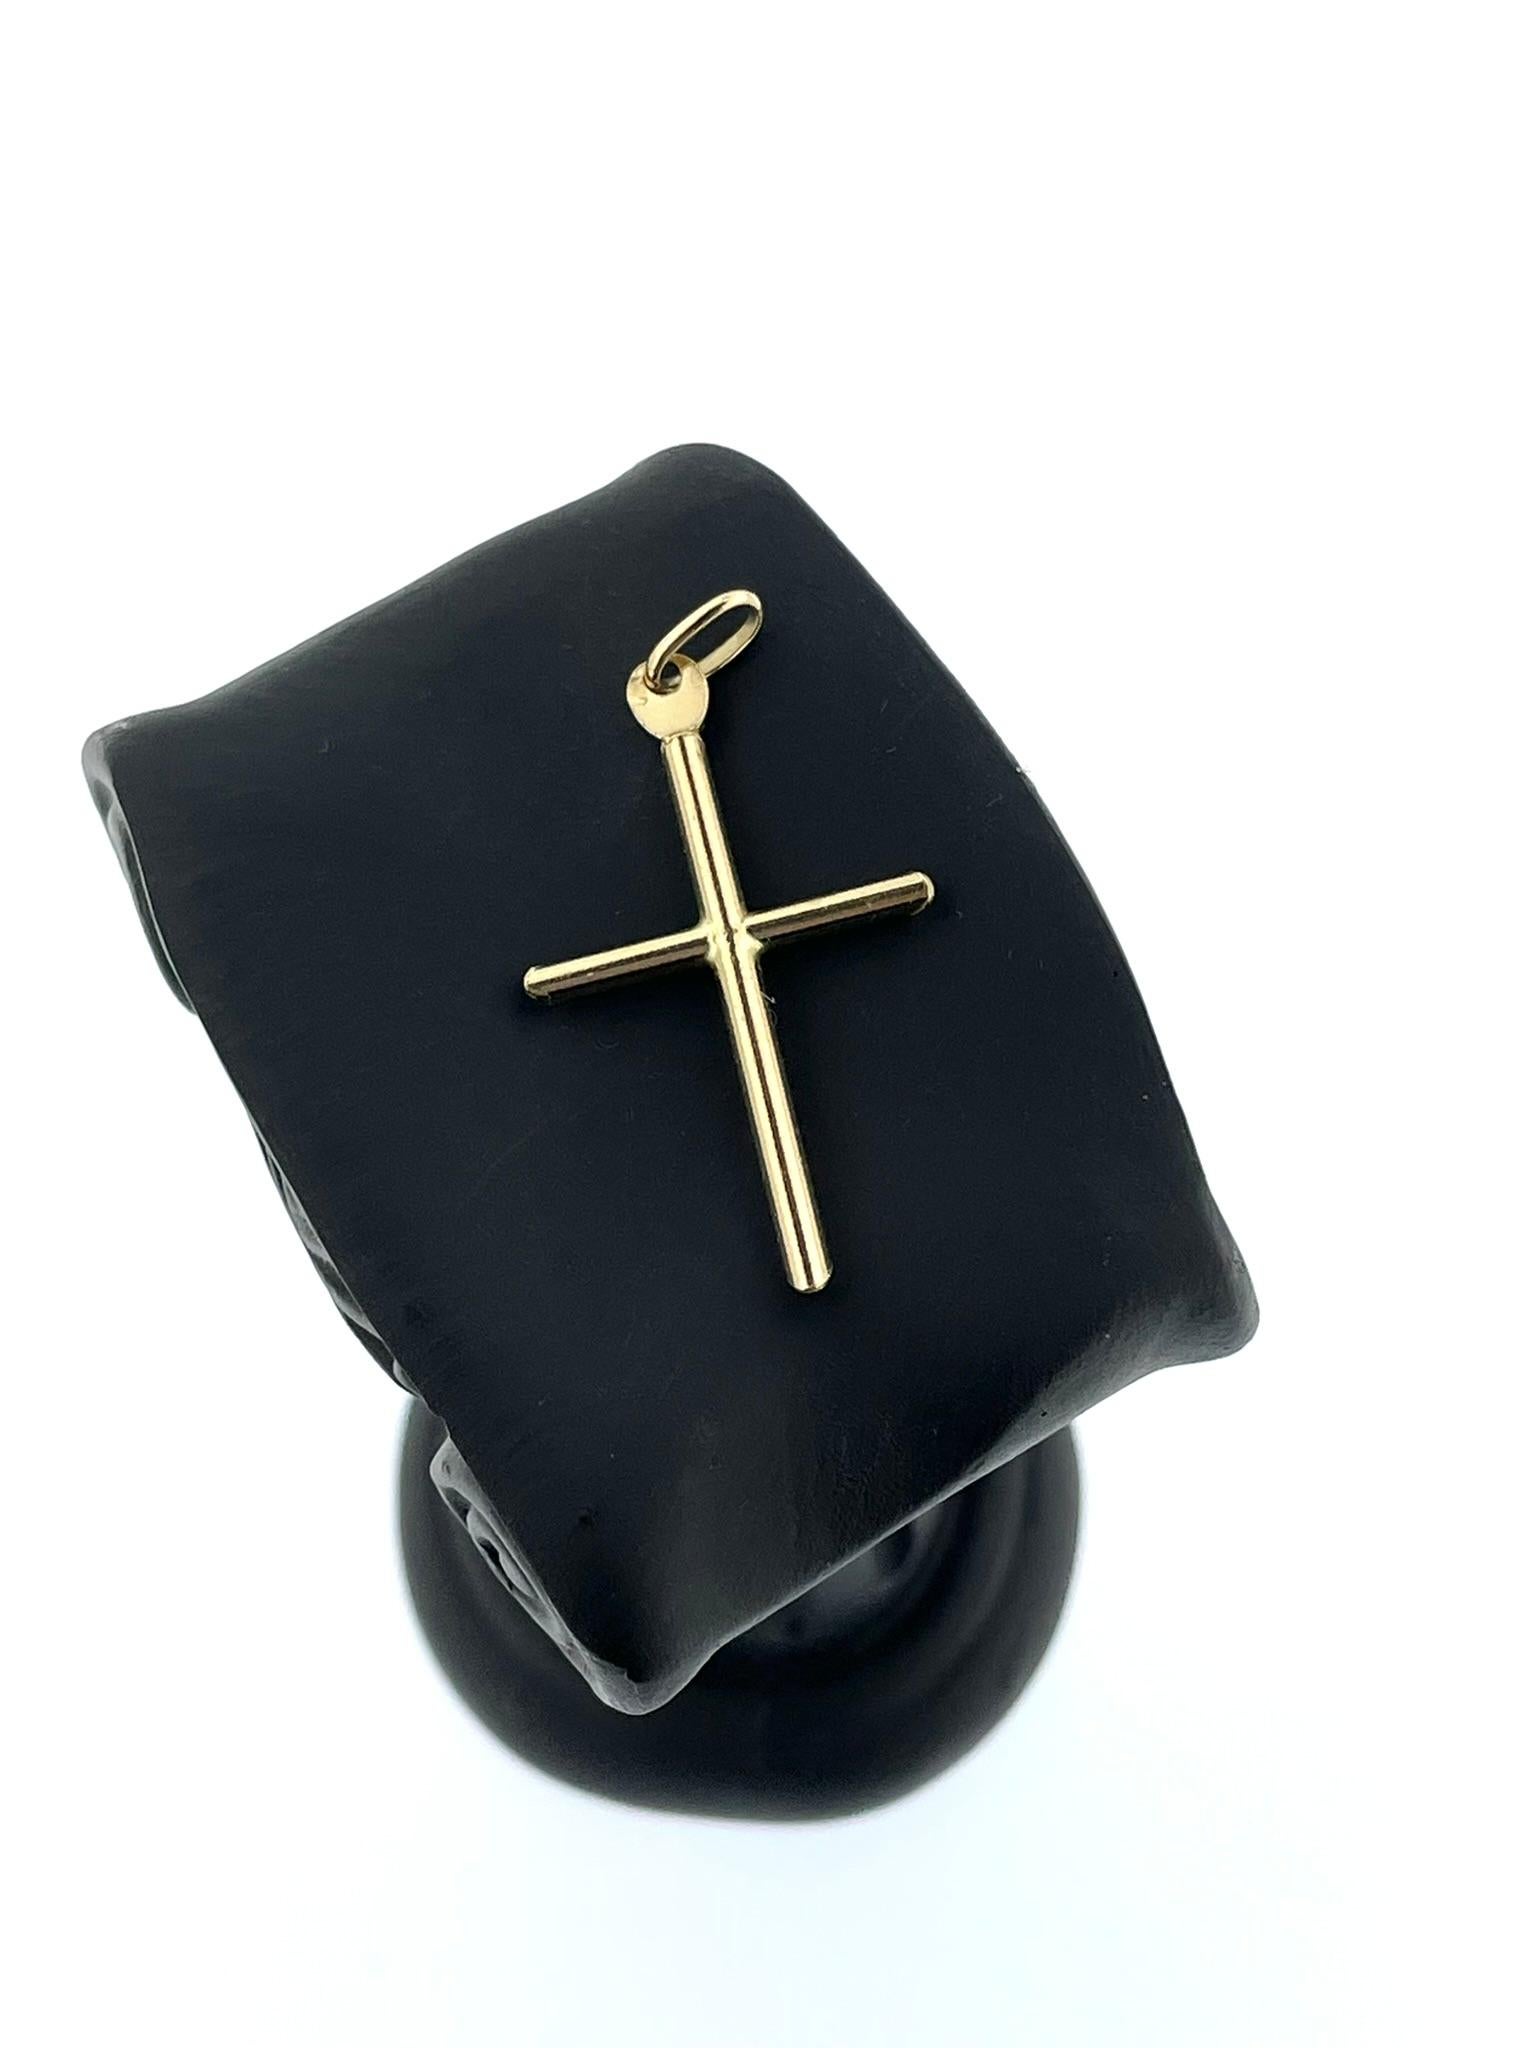 The Italian Modern Cross Yellow Gold is a contemporary interpretation of a classic religious symbol, crafted with elegance and sophistication. Made from 18-karat yellow gold, this cross pendant exudes luxury and quality.

The 